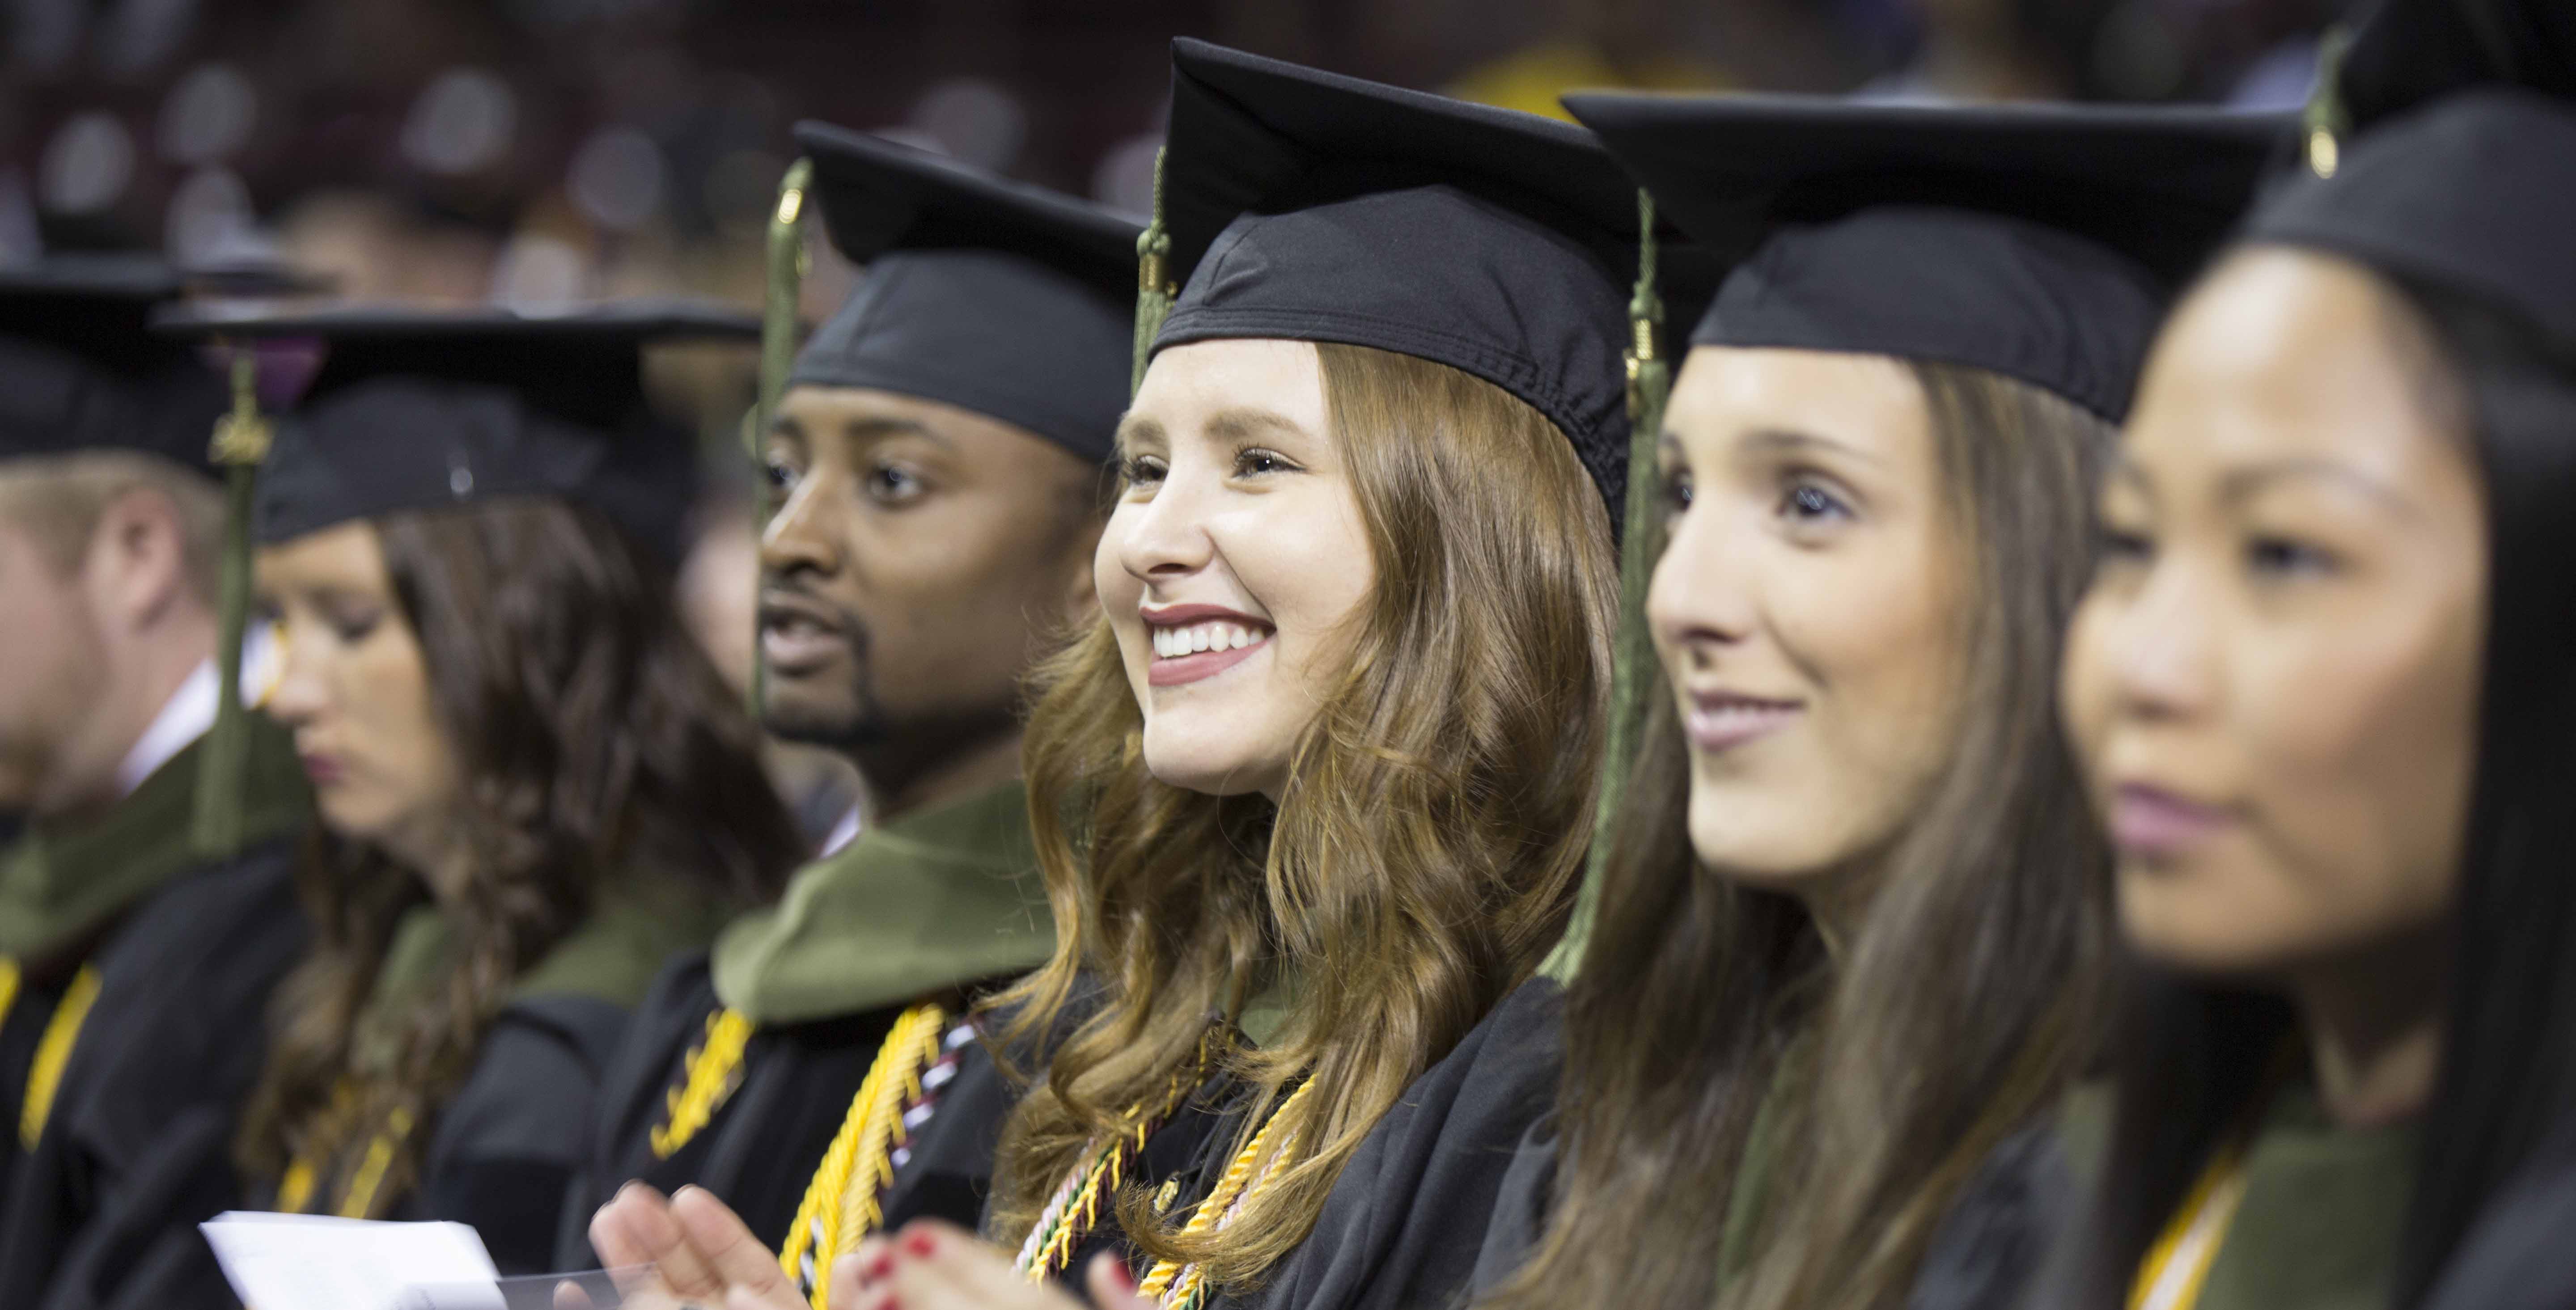 students sitting at commencement ceremony wearing black caps and gowns